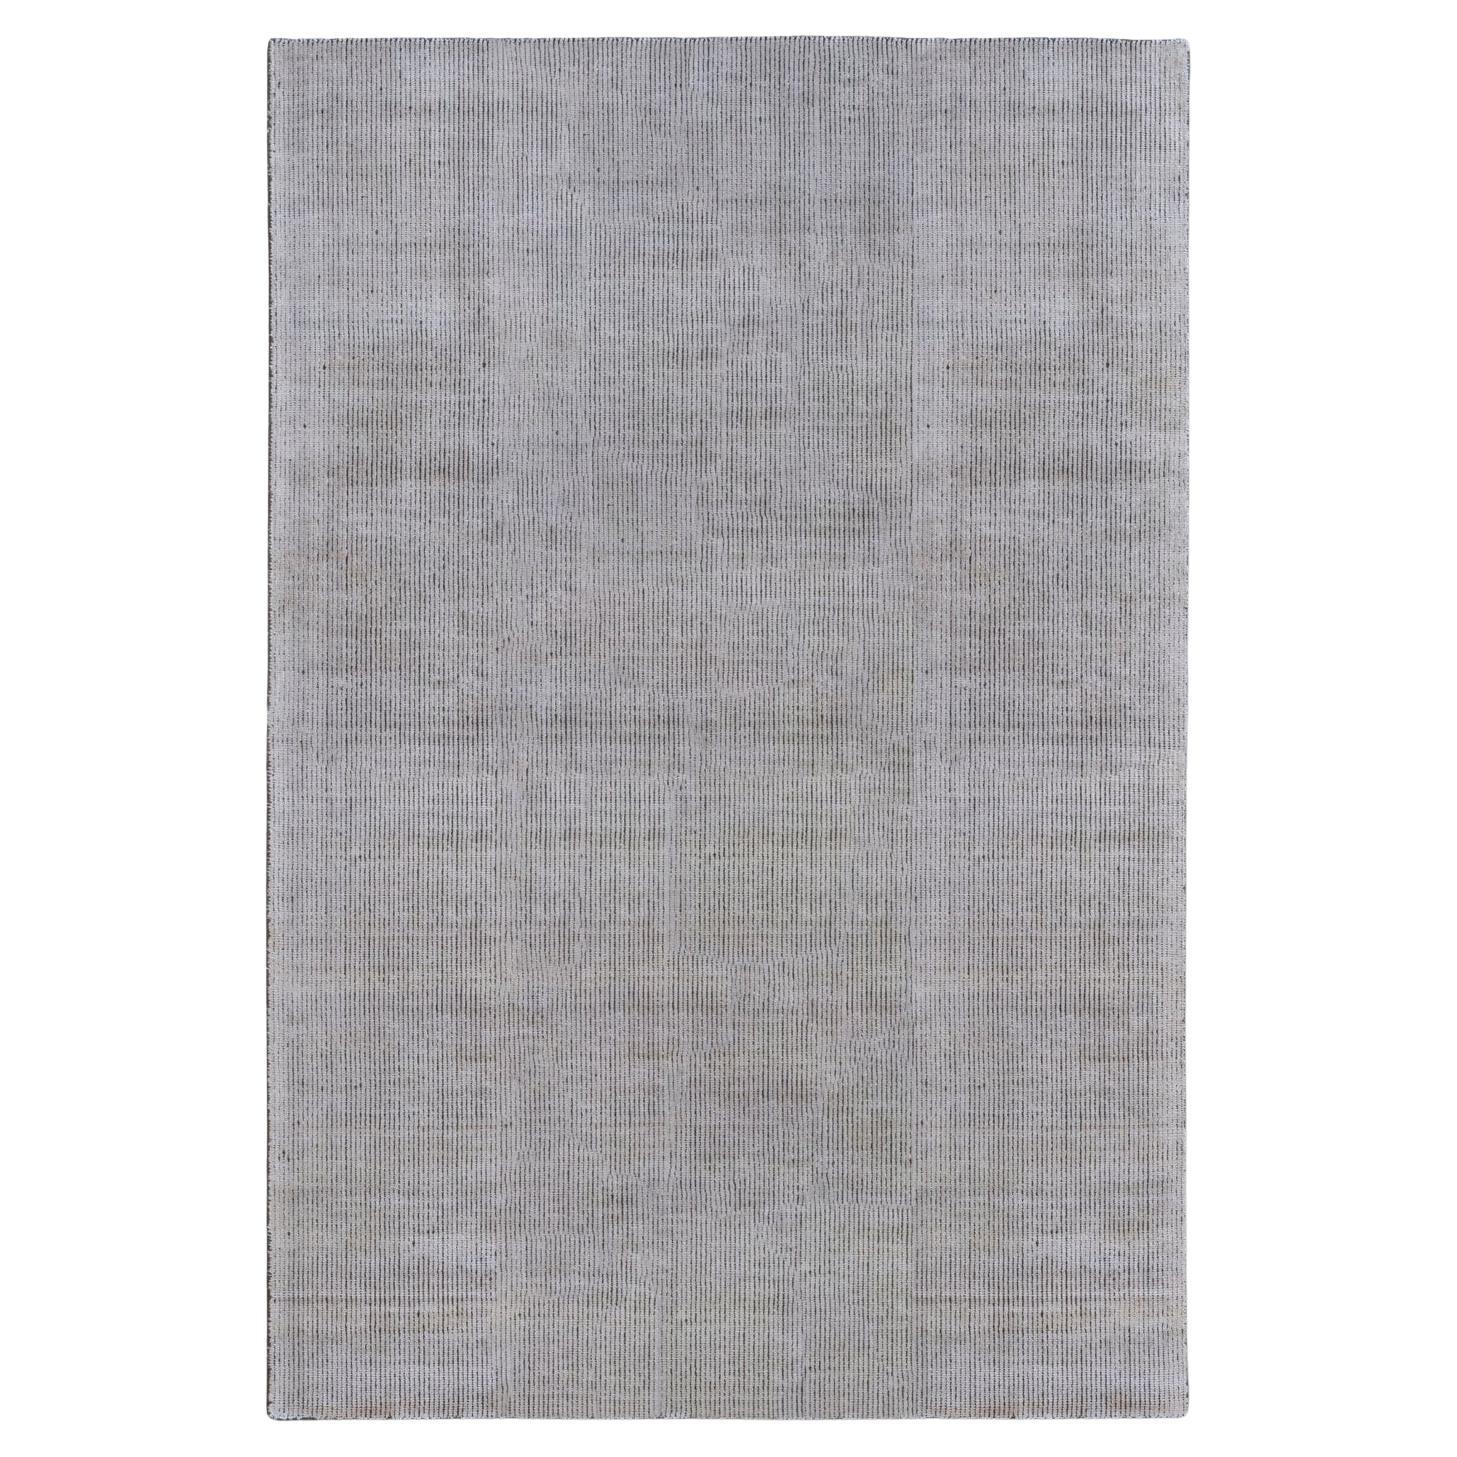 21st Cent Eco-Friendly Velvety White Rug by Deanna Comellini In Stock 200x300 cm